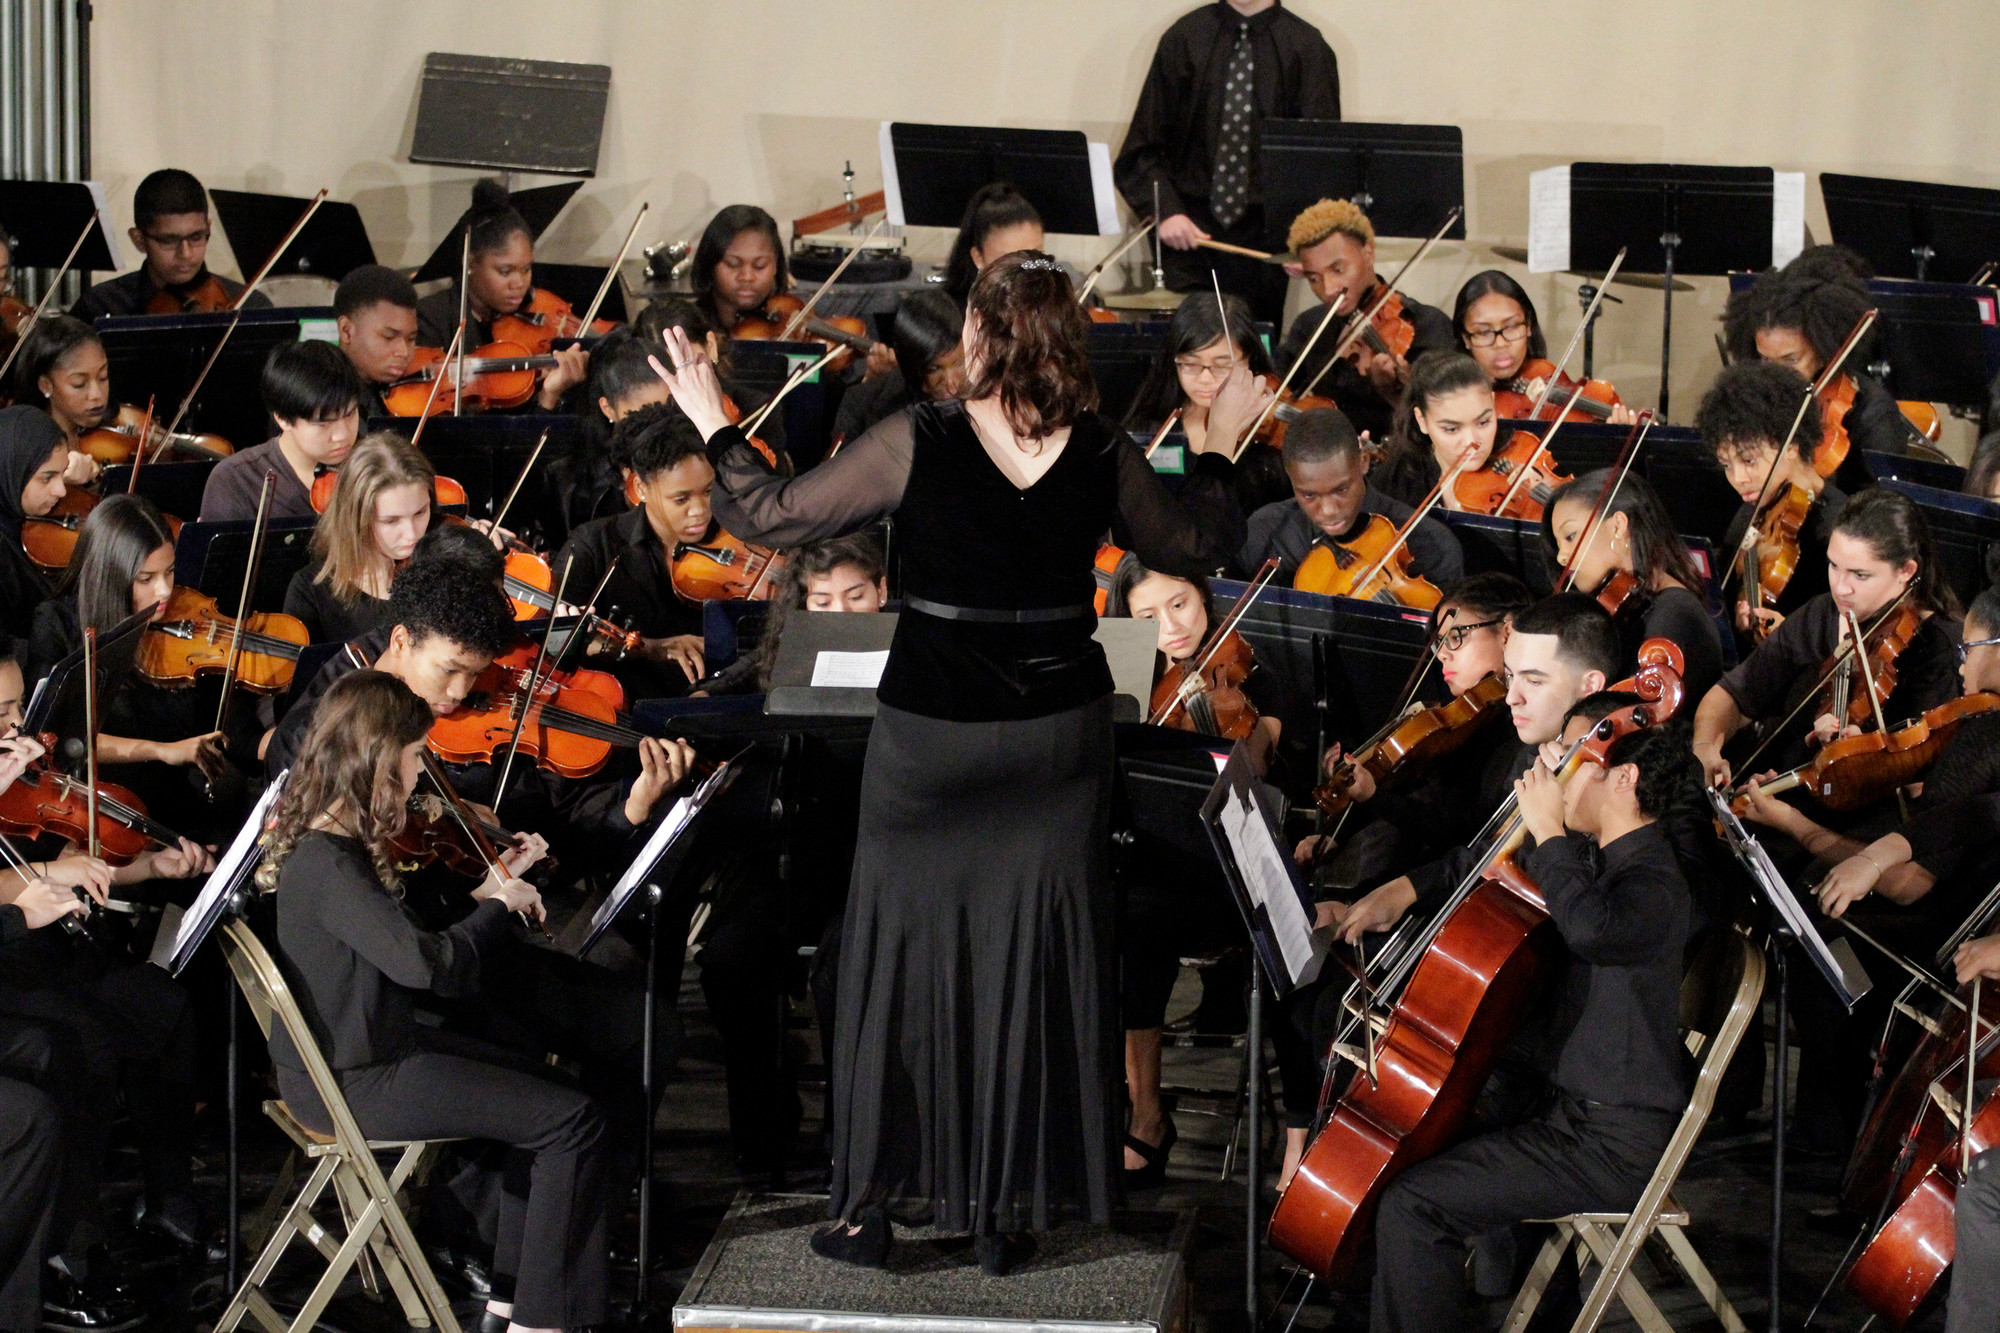 The school’s orchestra played a variety of pieces at the Dec. 9 concert.